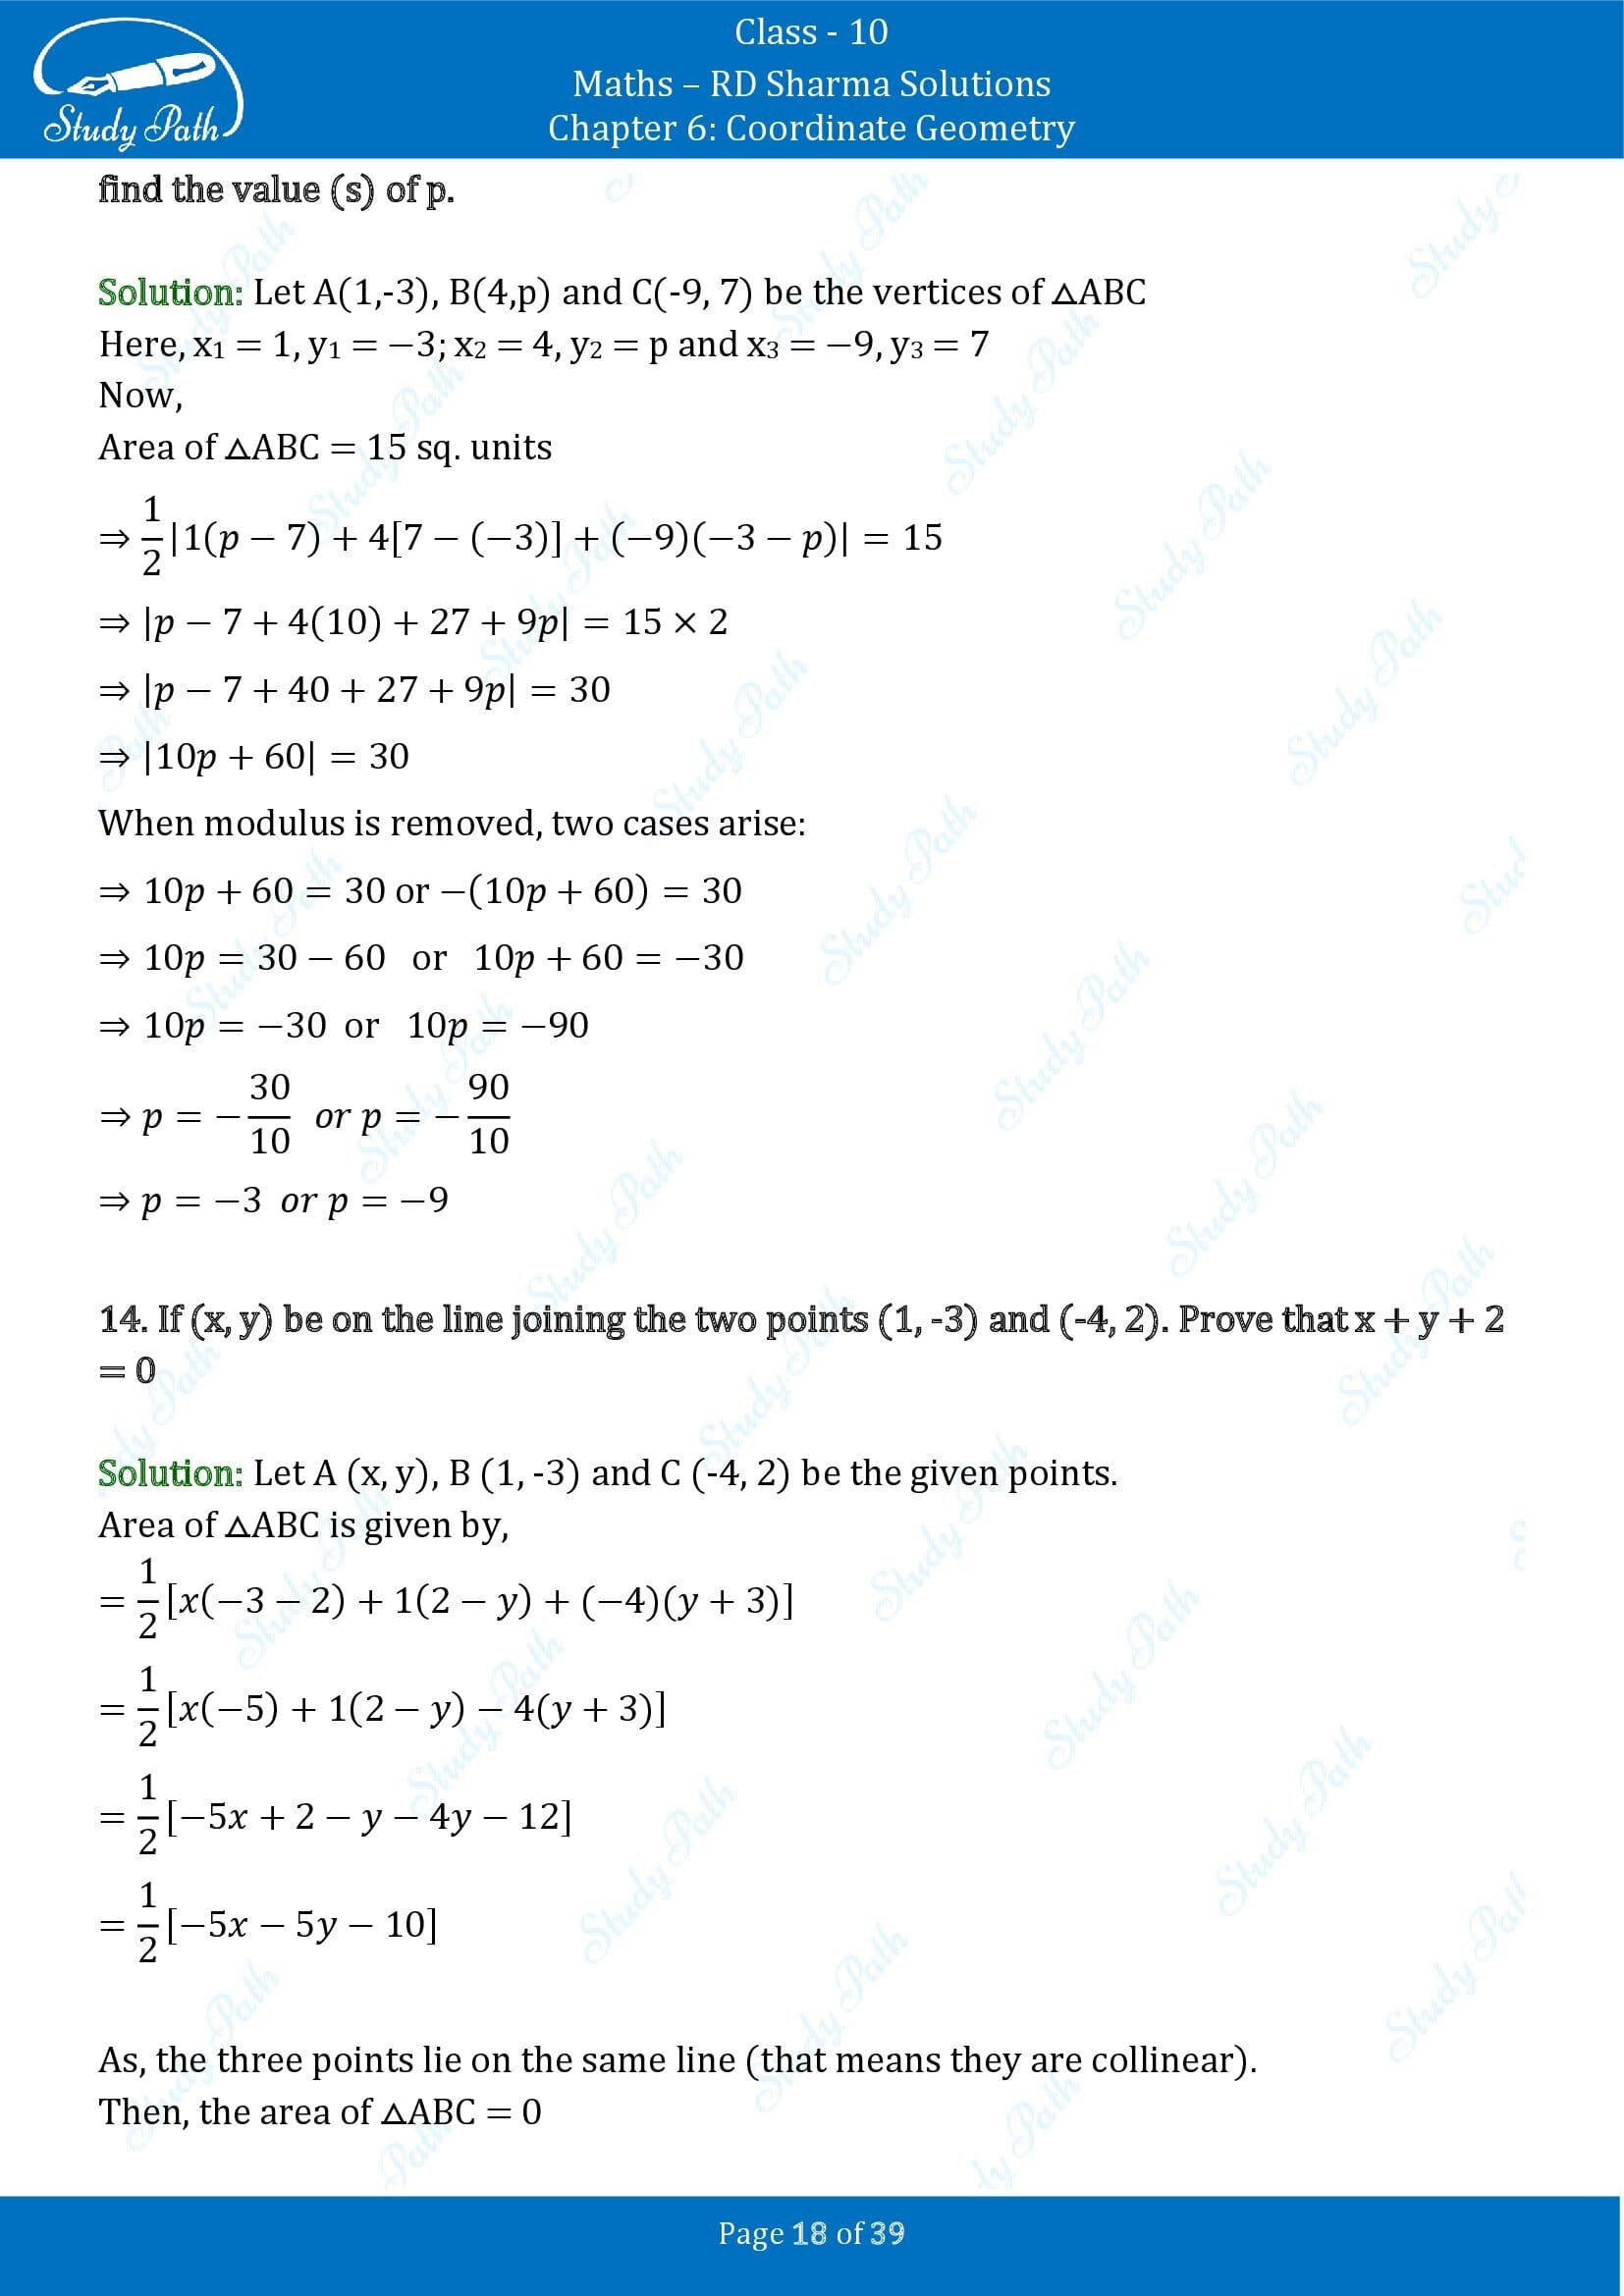 RD Sharma Solutions Class 10 Chapter 6 Coordinate Geometry Exercise 6.5 0018